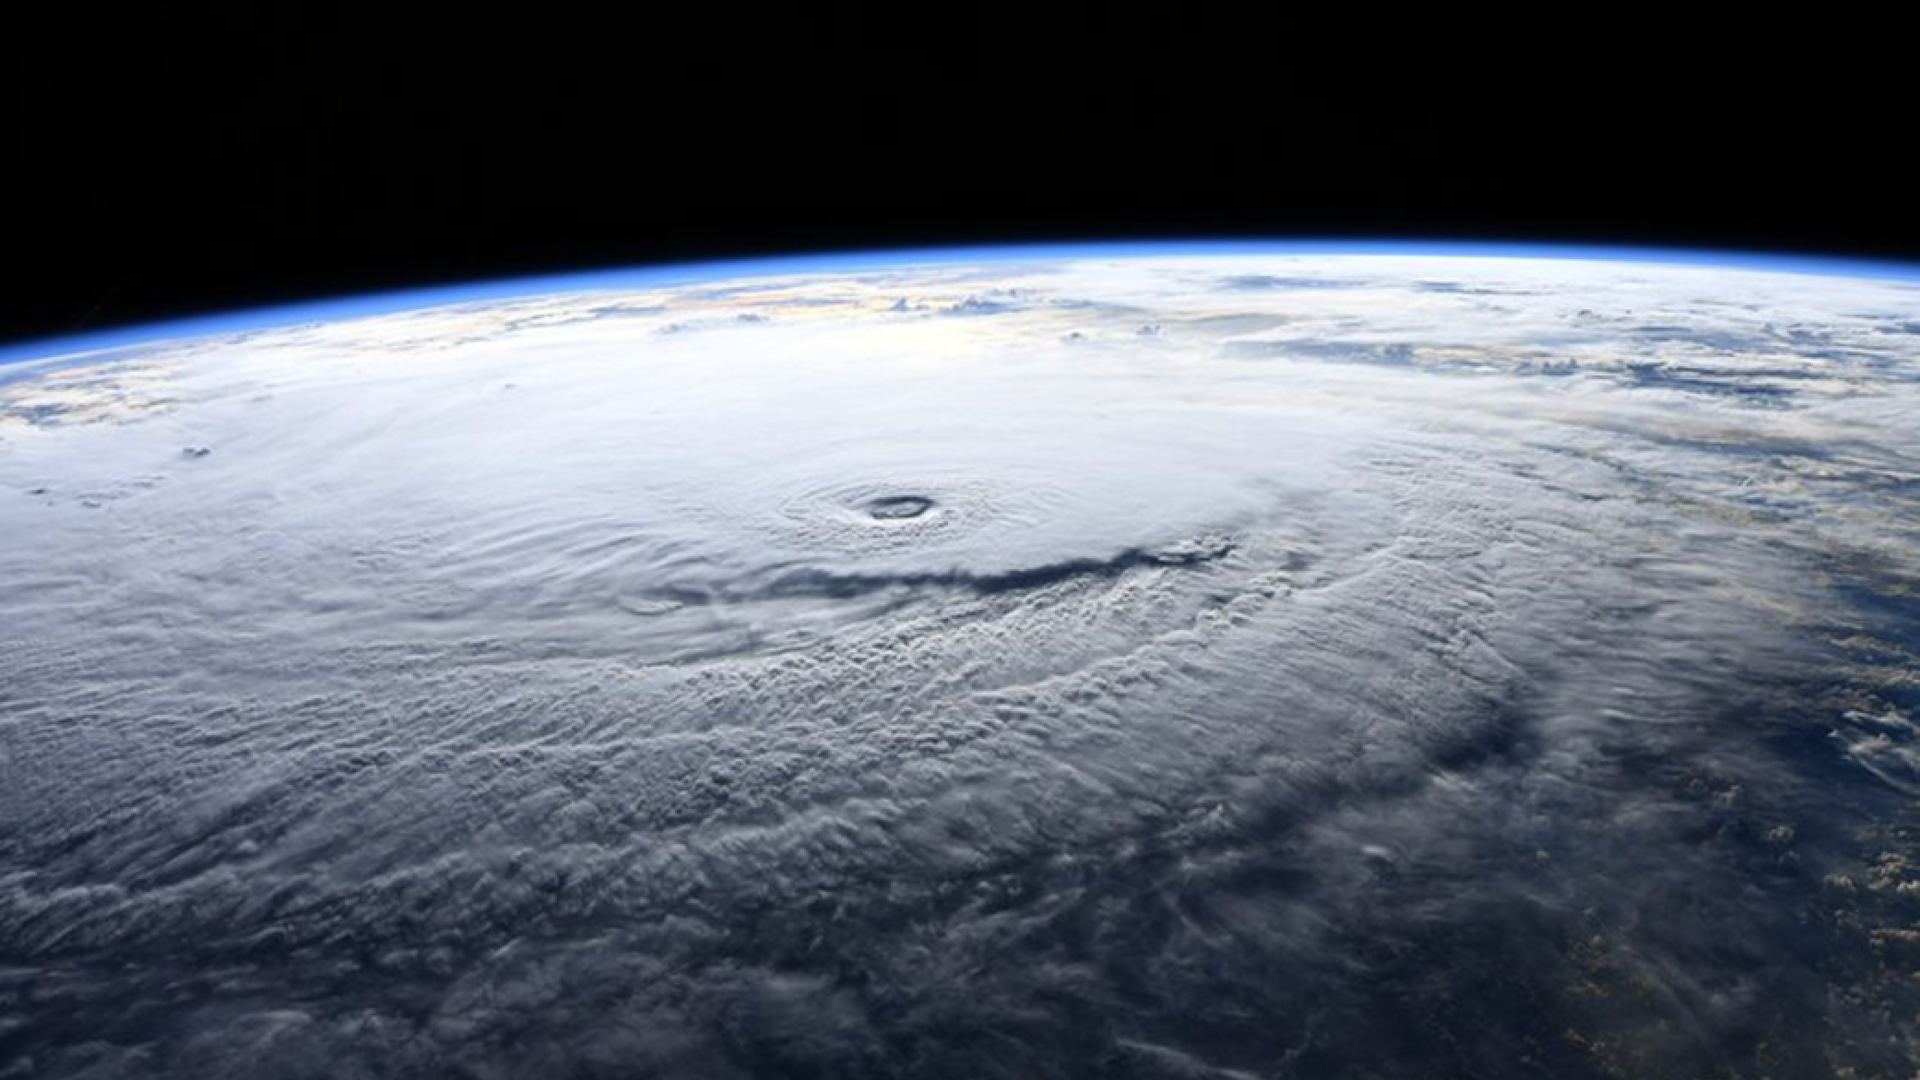 NASA astronaut Ricky Arnold photographed Hurricane Lane during a flyover on Aug. 22, 2018.